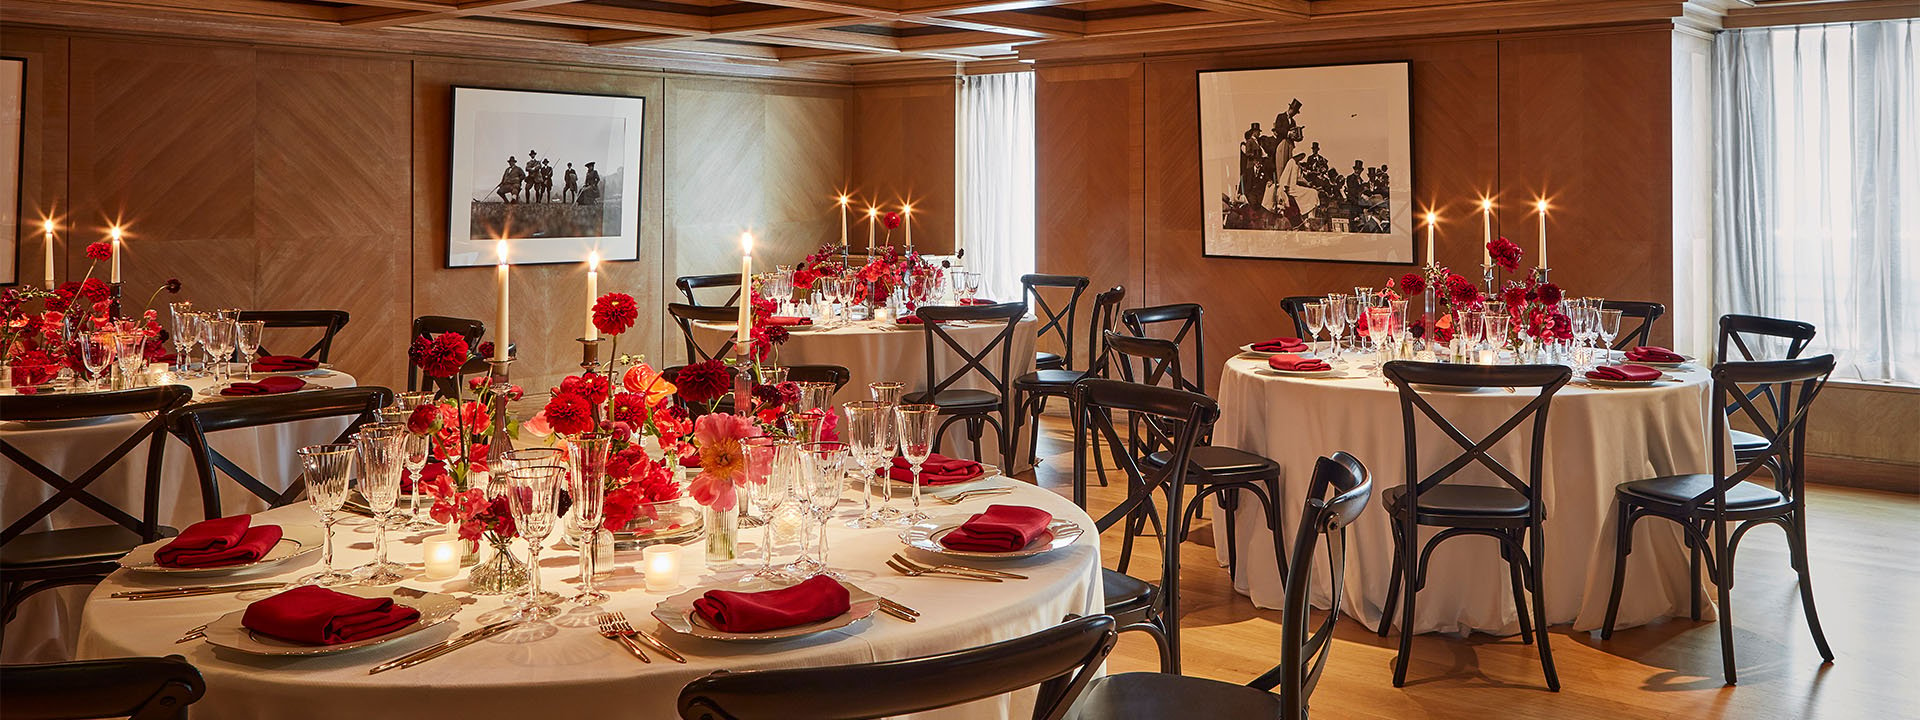 A luxurious dining room is elegantly set for an event, featuring round tables with white tablecloths, red floral centrepieces and candles surrounded by dark wooden chairs. Framed black and white photographs hangs on the wood-paneled walls.